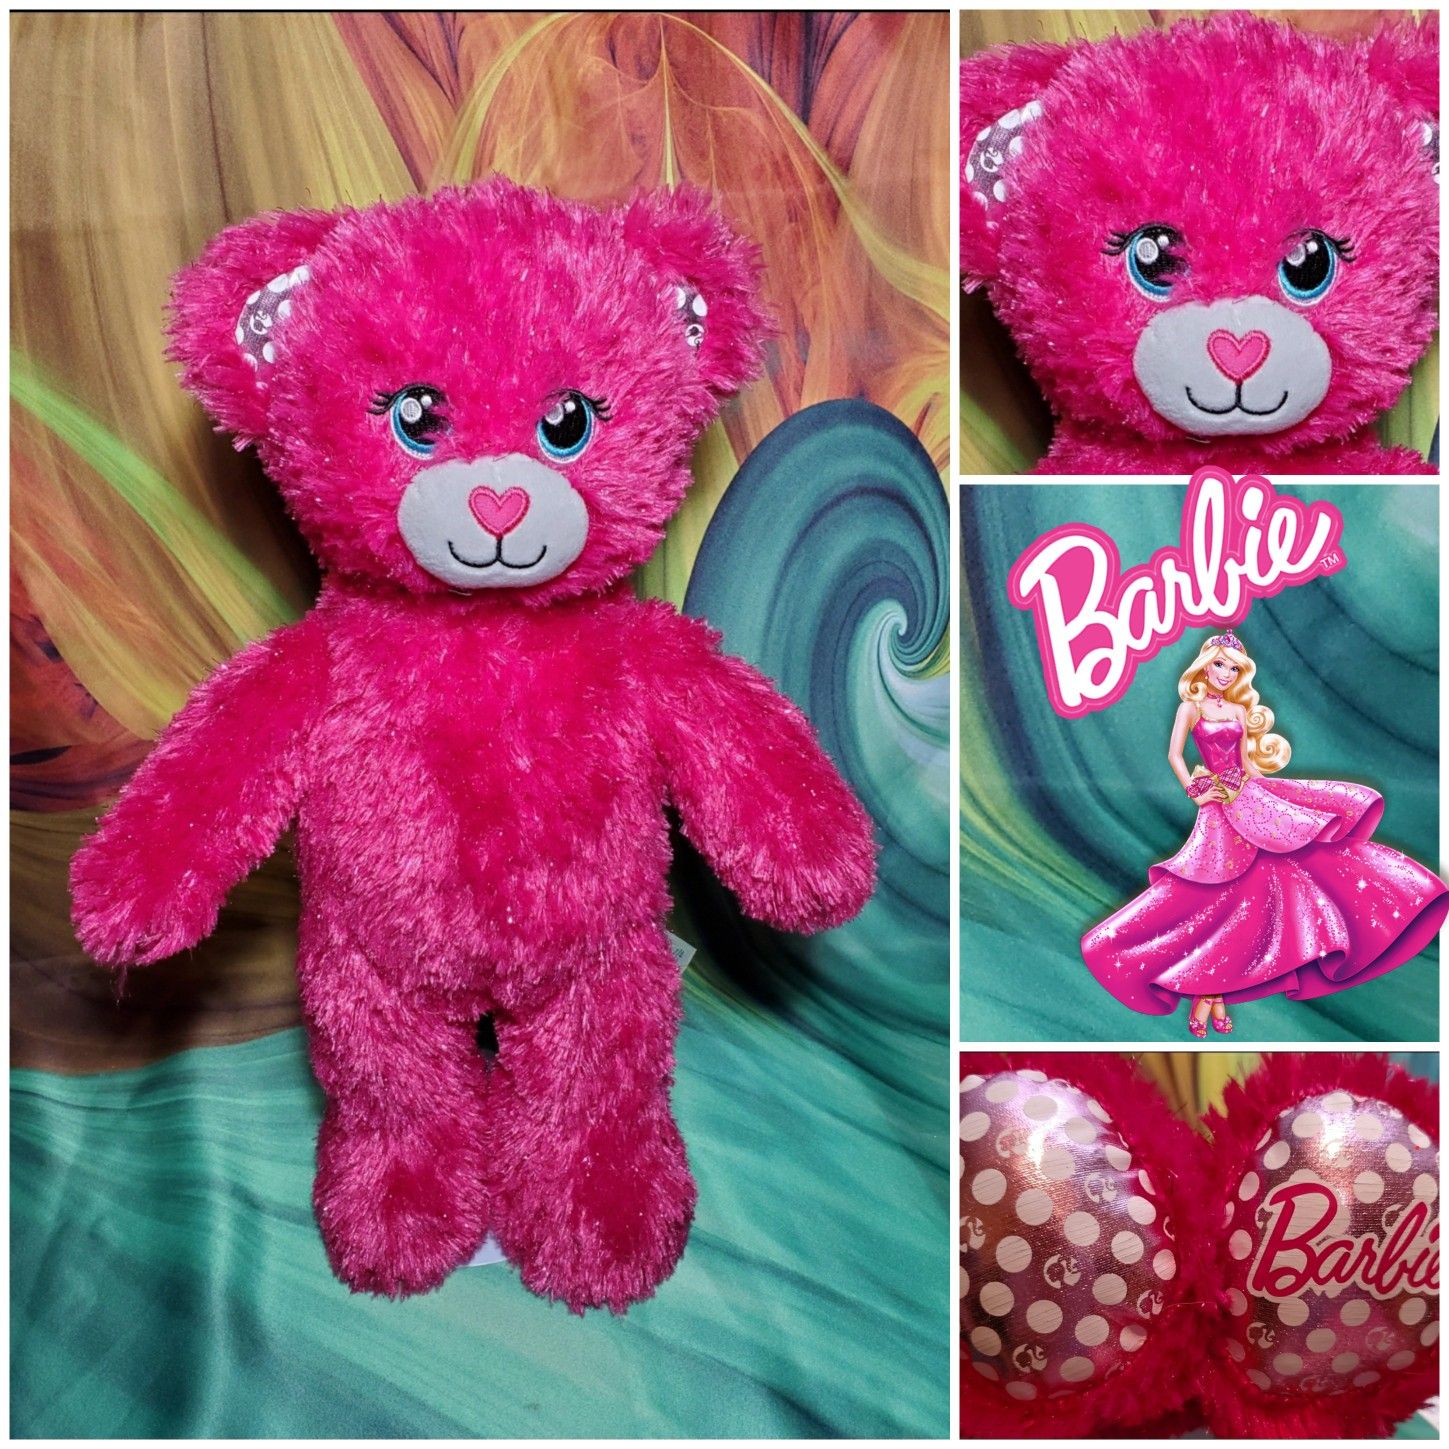 17" Build A Bear BARBIE Sparkly Pink Plush Teddy Retired Limited Edition Doll